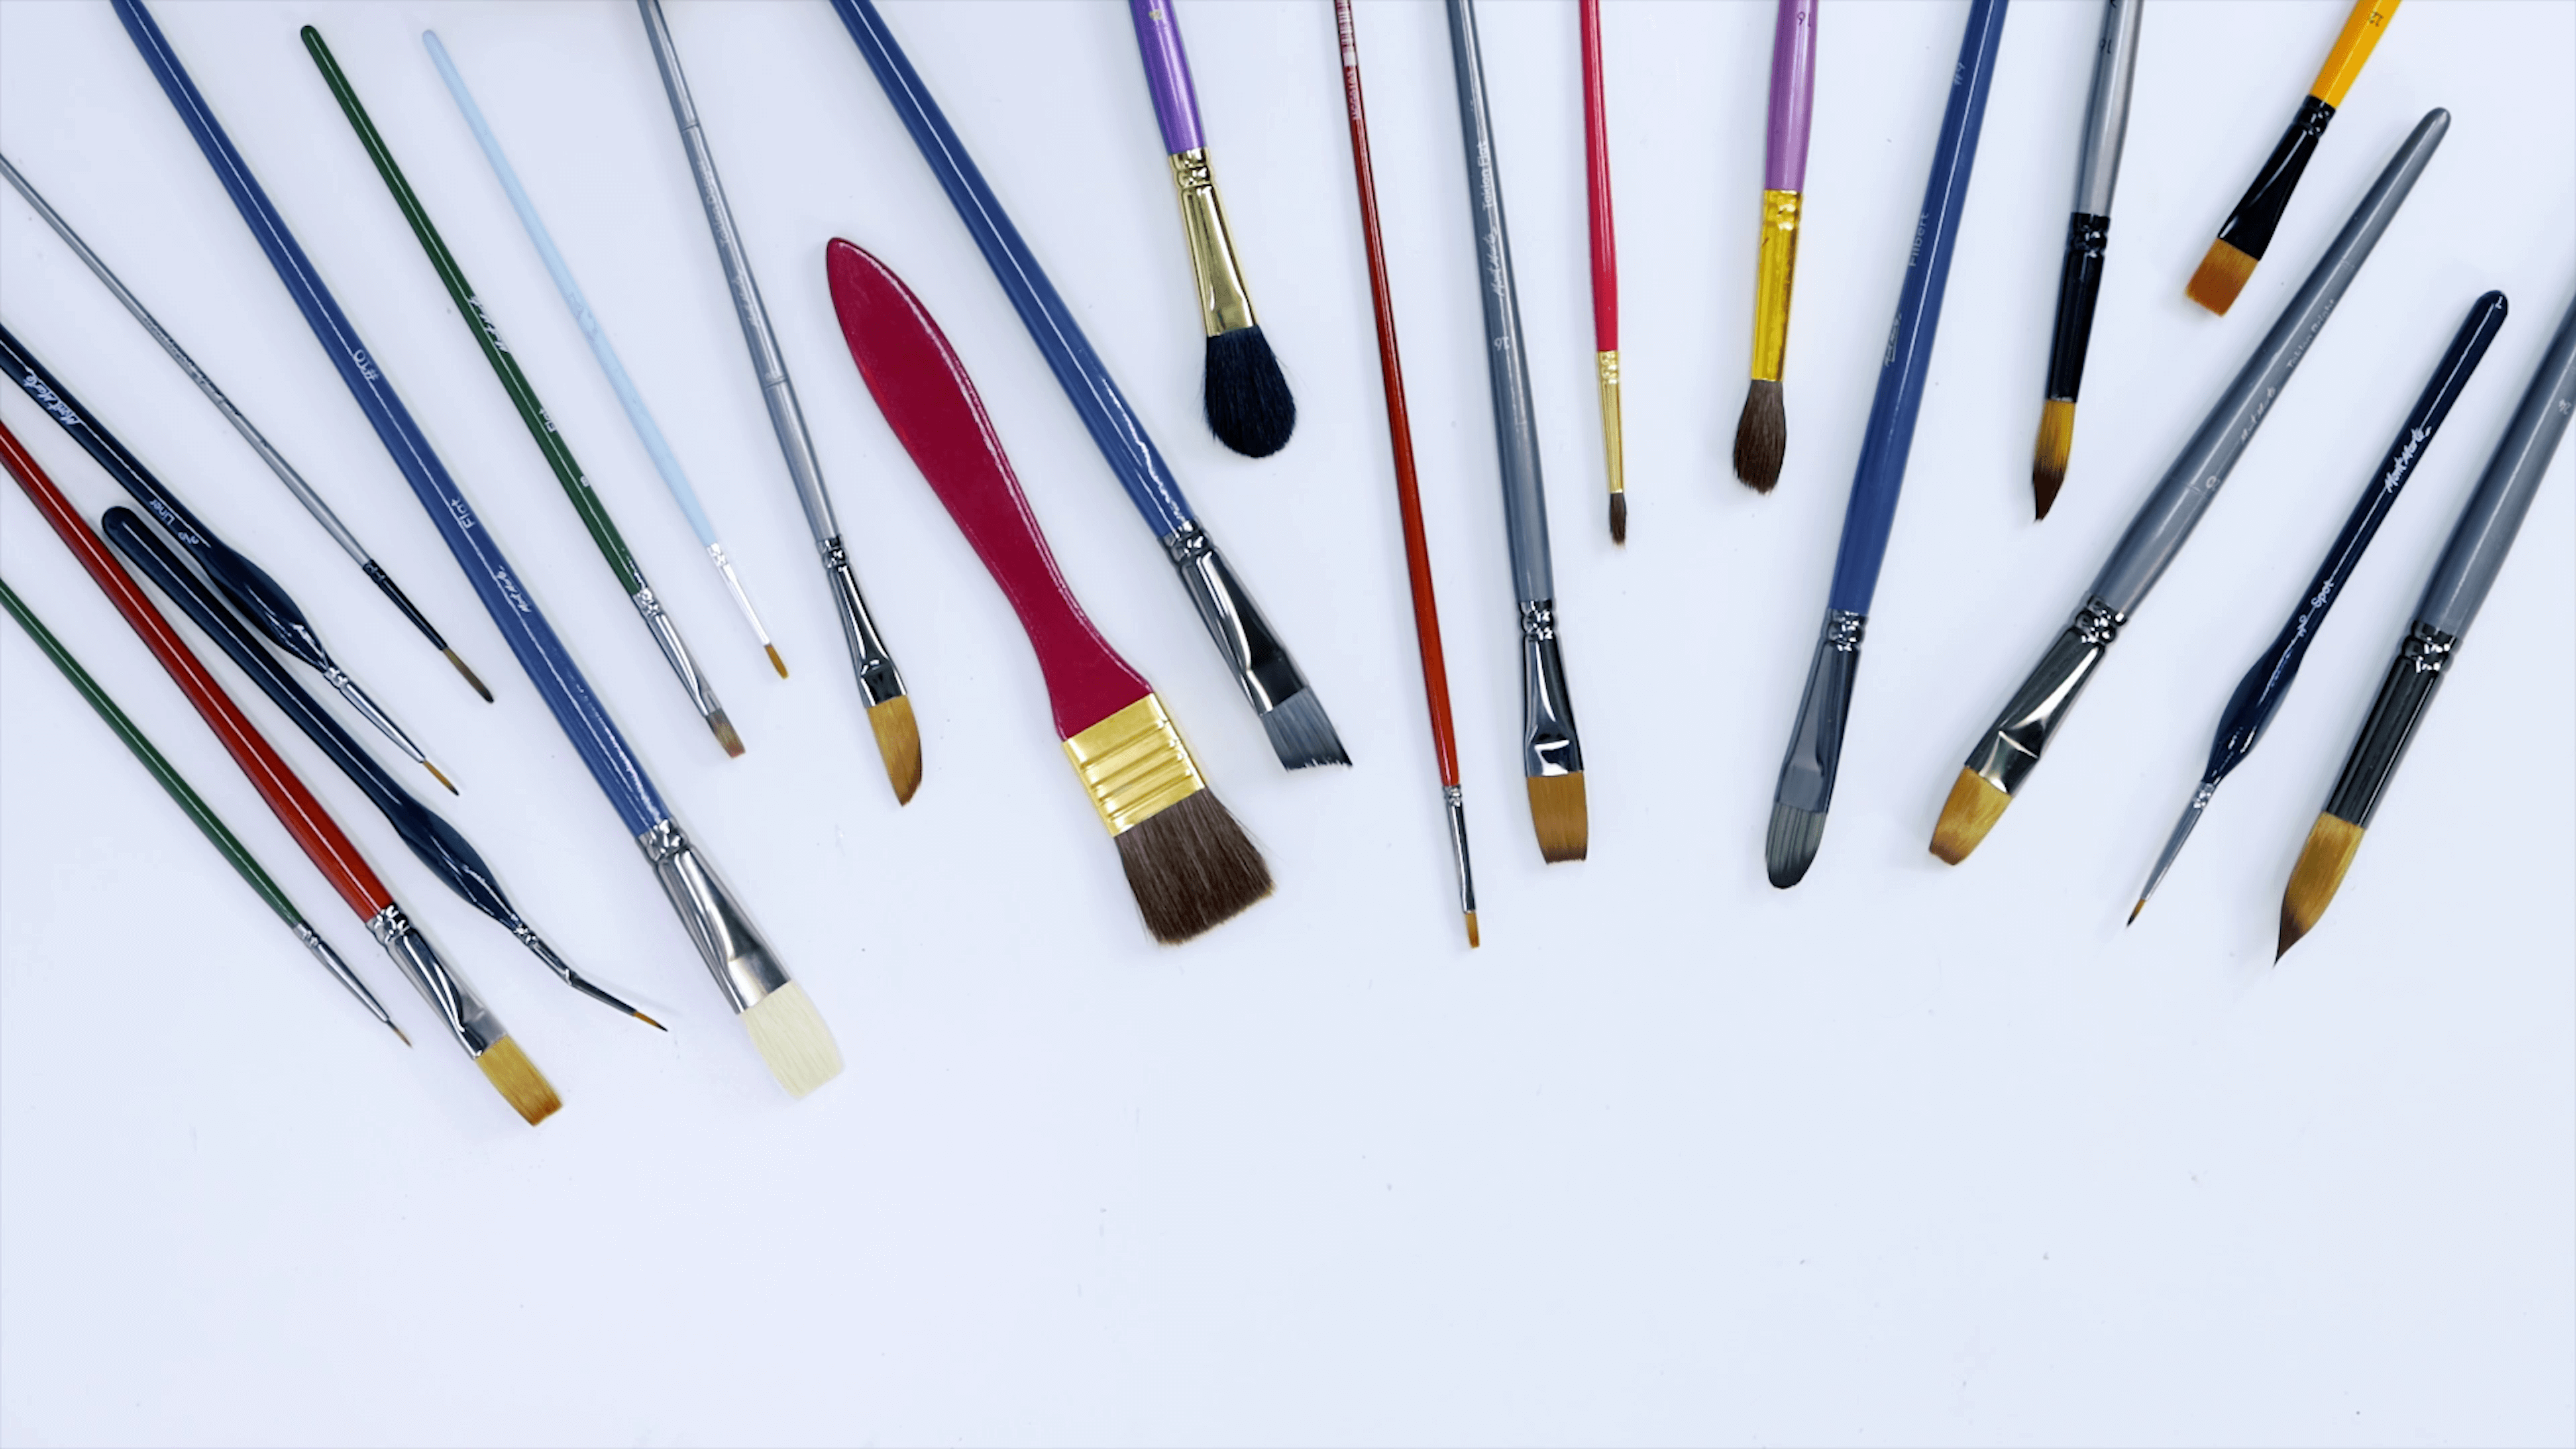 Range of different Mont Marte acrylic paint brushes of different sizes and lengths.